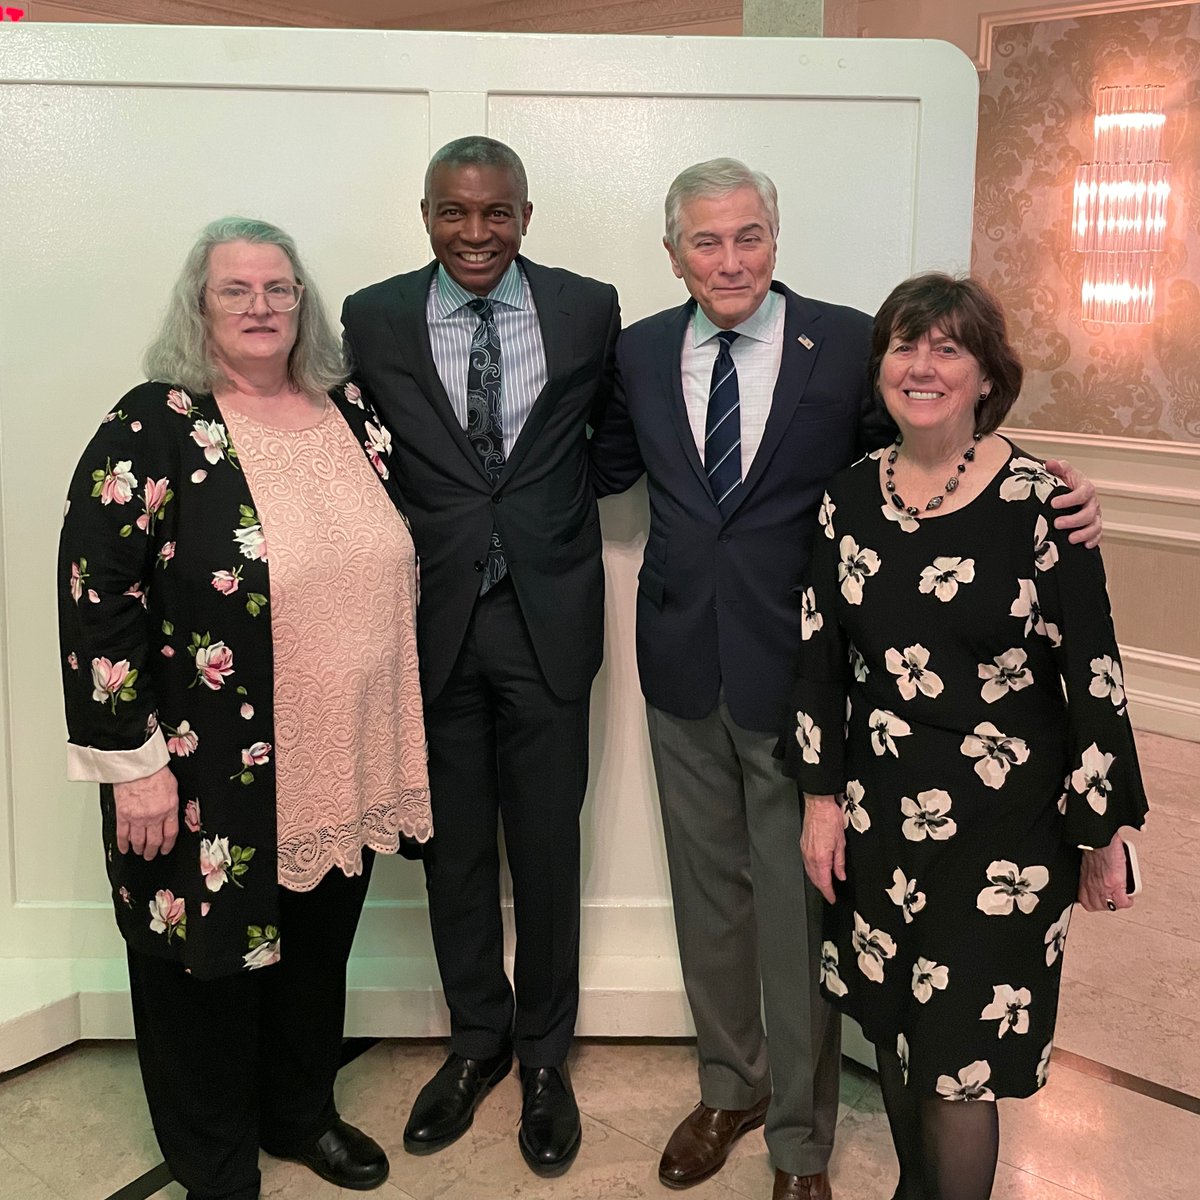 One of my early assignments as a young congressional staffer for Congressman Lester Wolff was supporting the invaluable work of the @APECofQueens. It was so great to be with Executive Director Irene Scheid, Honoree Dr. Gerrard Bushell, and the great Terri Thomson at their 2024